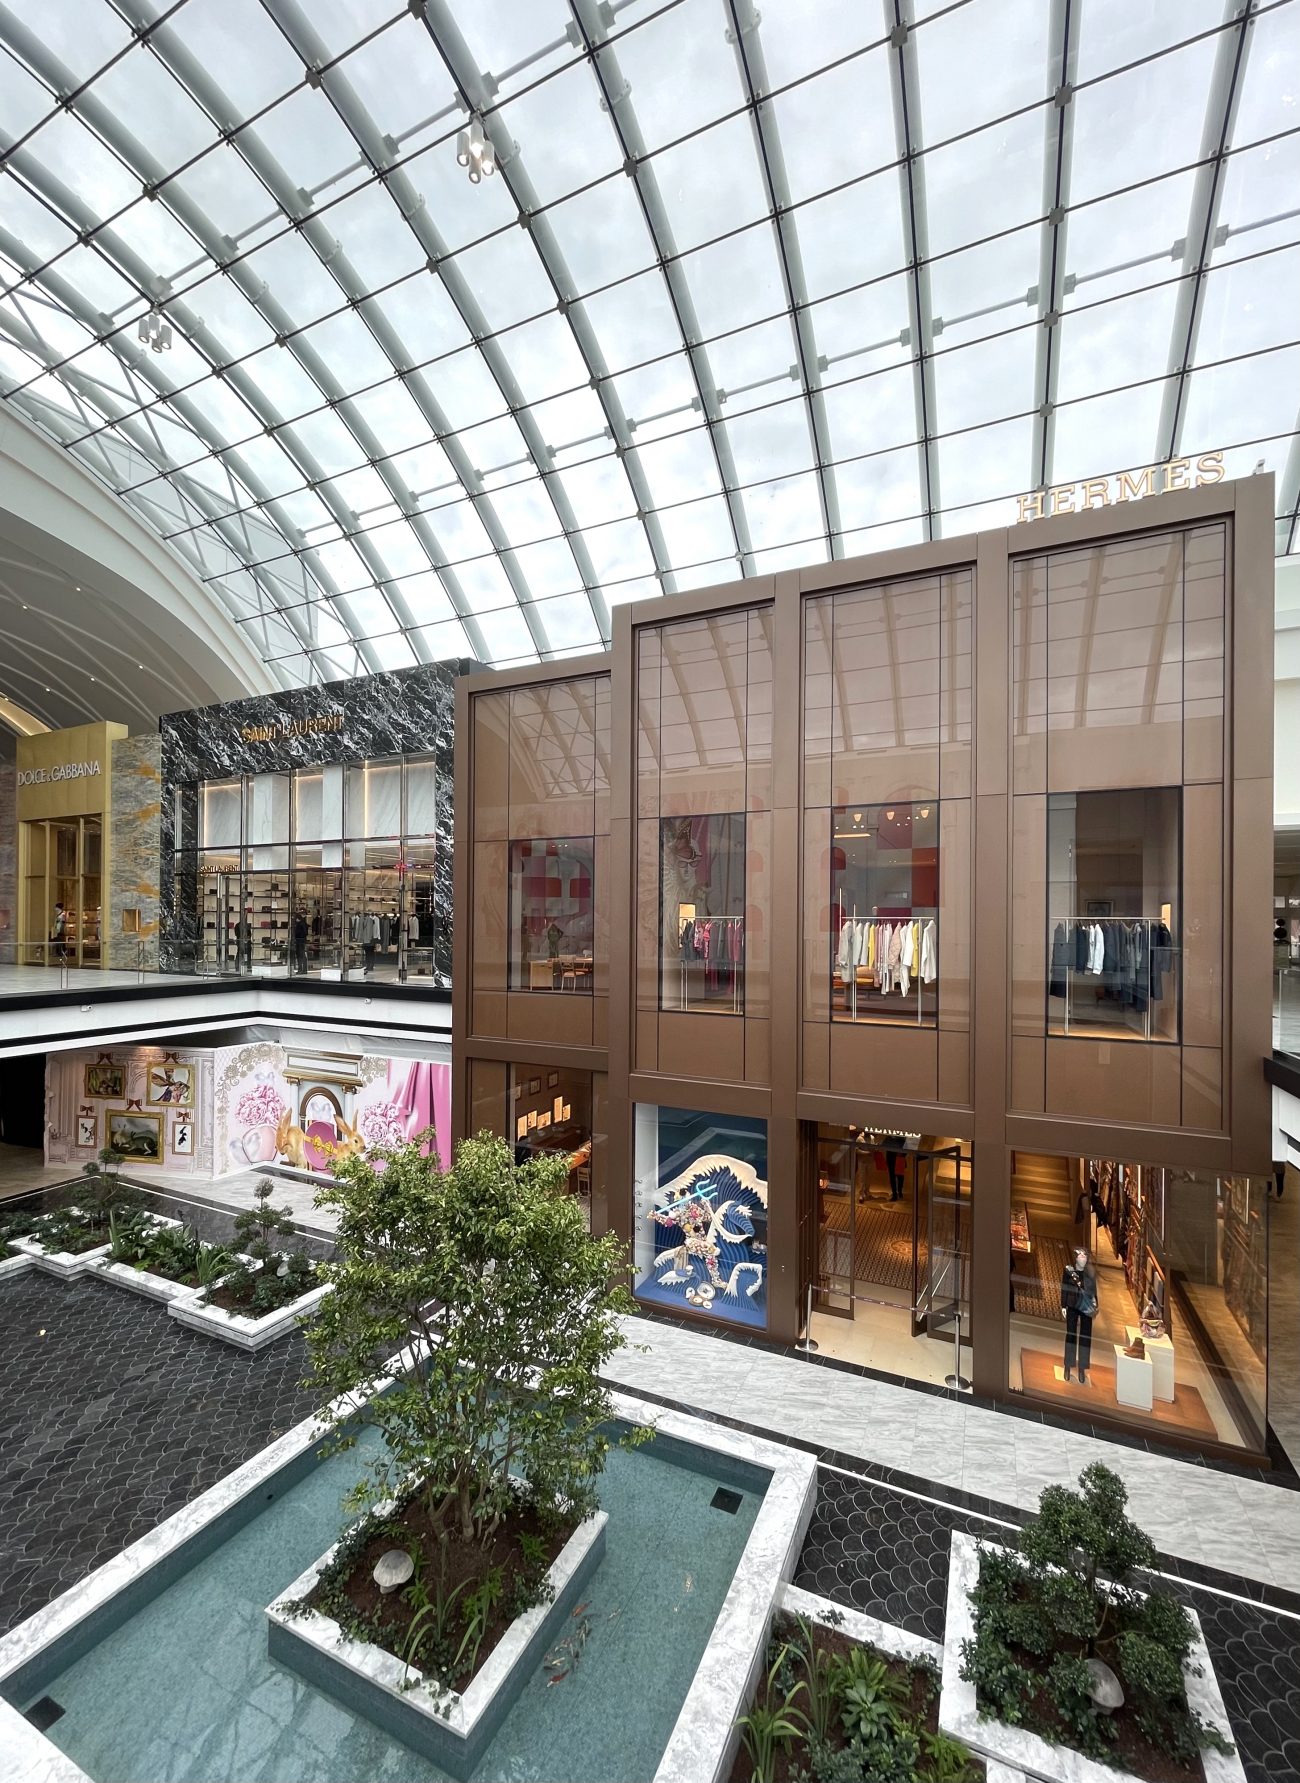 The Avenue' Retail Wing Opens at American Dream Mall in East